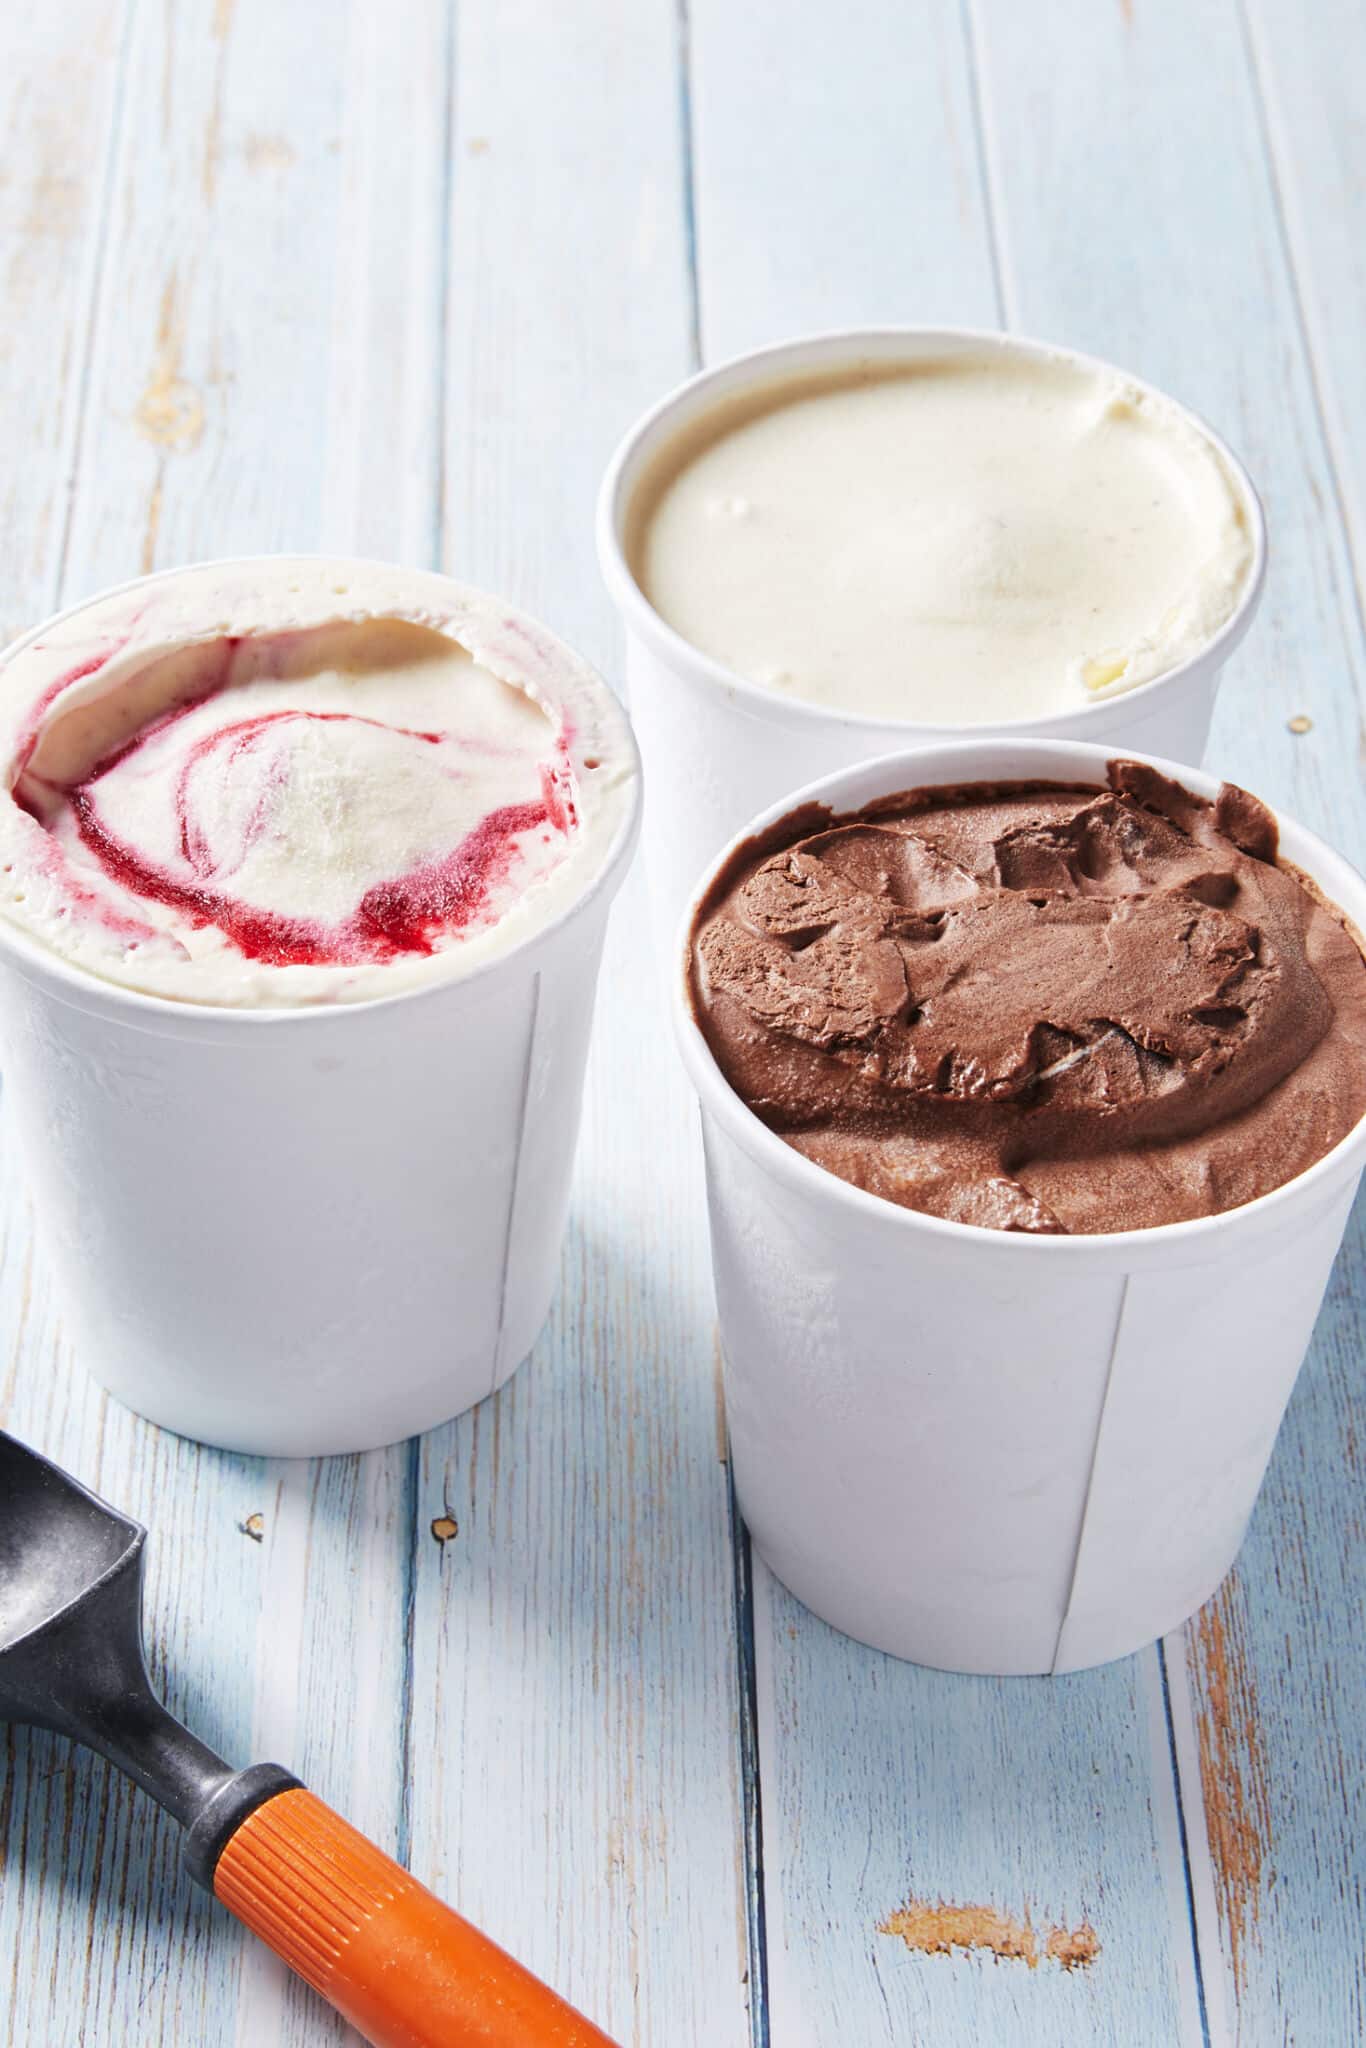 3 containers of No-Churn Artisanal Ice Cream : Vanilla Bean Flavor, Raspberry Ripple, and Double Chocolate.